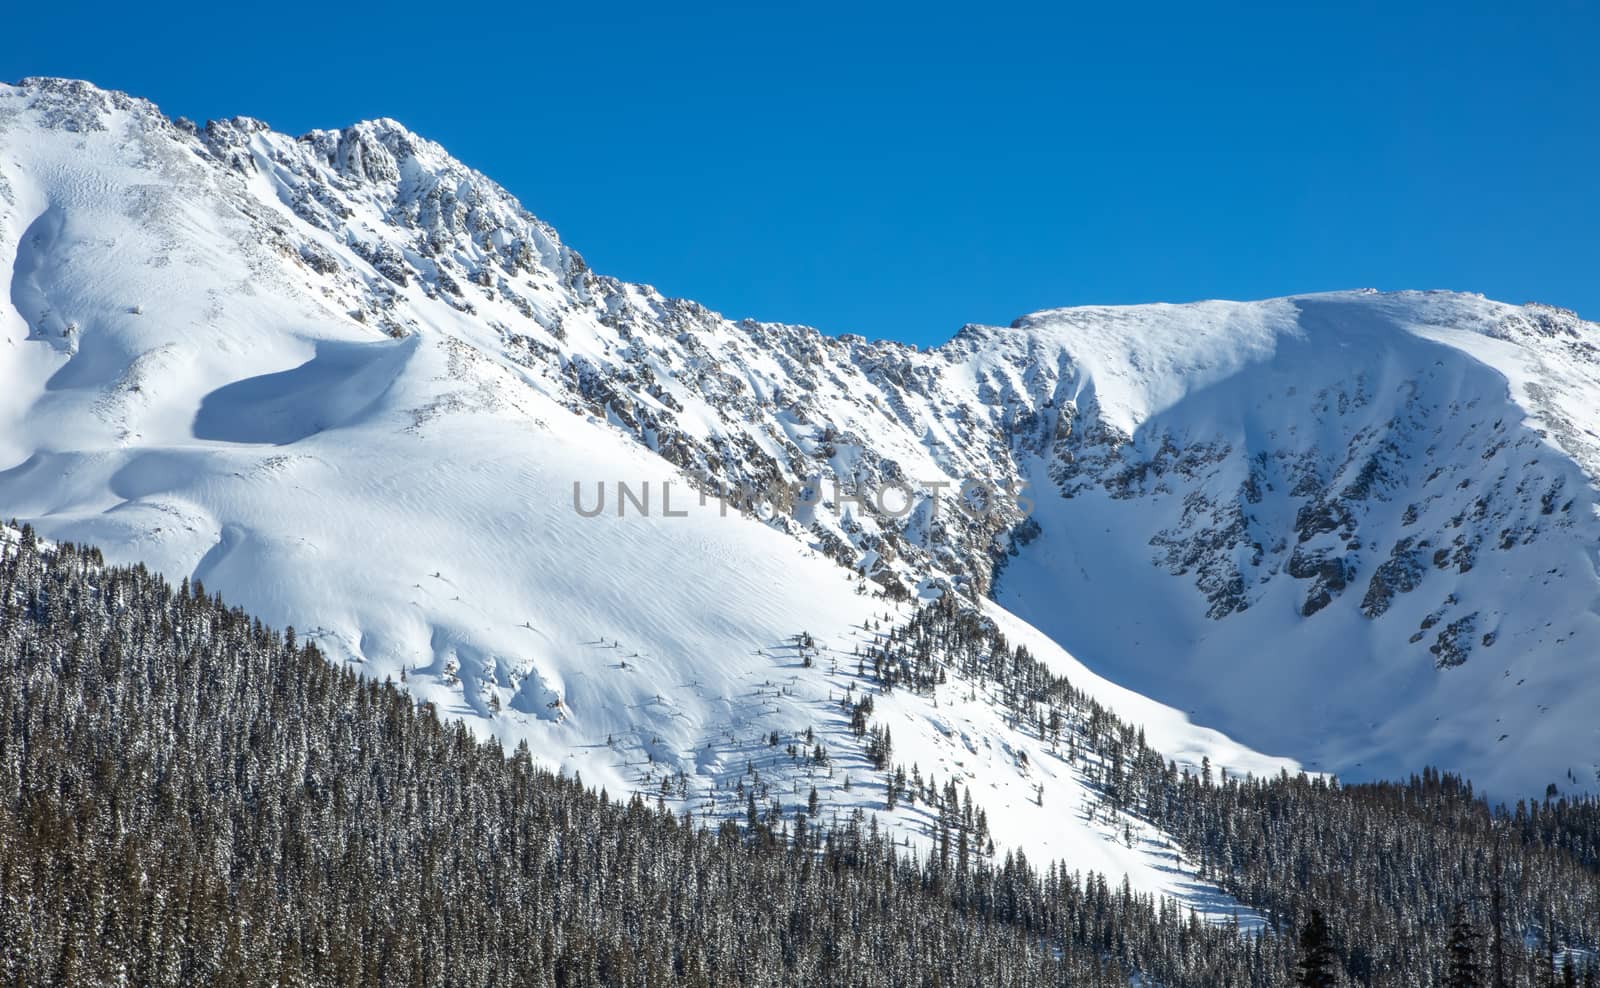 The majestic snow covered slopes of the Rocky Mountains in Colorado.  Mountains covered in snow and surrounded by forest.